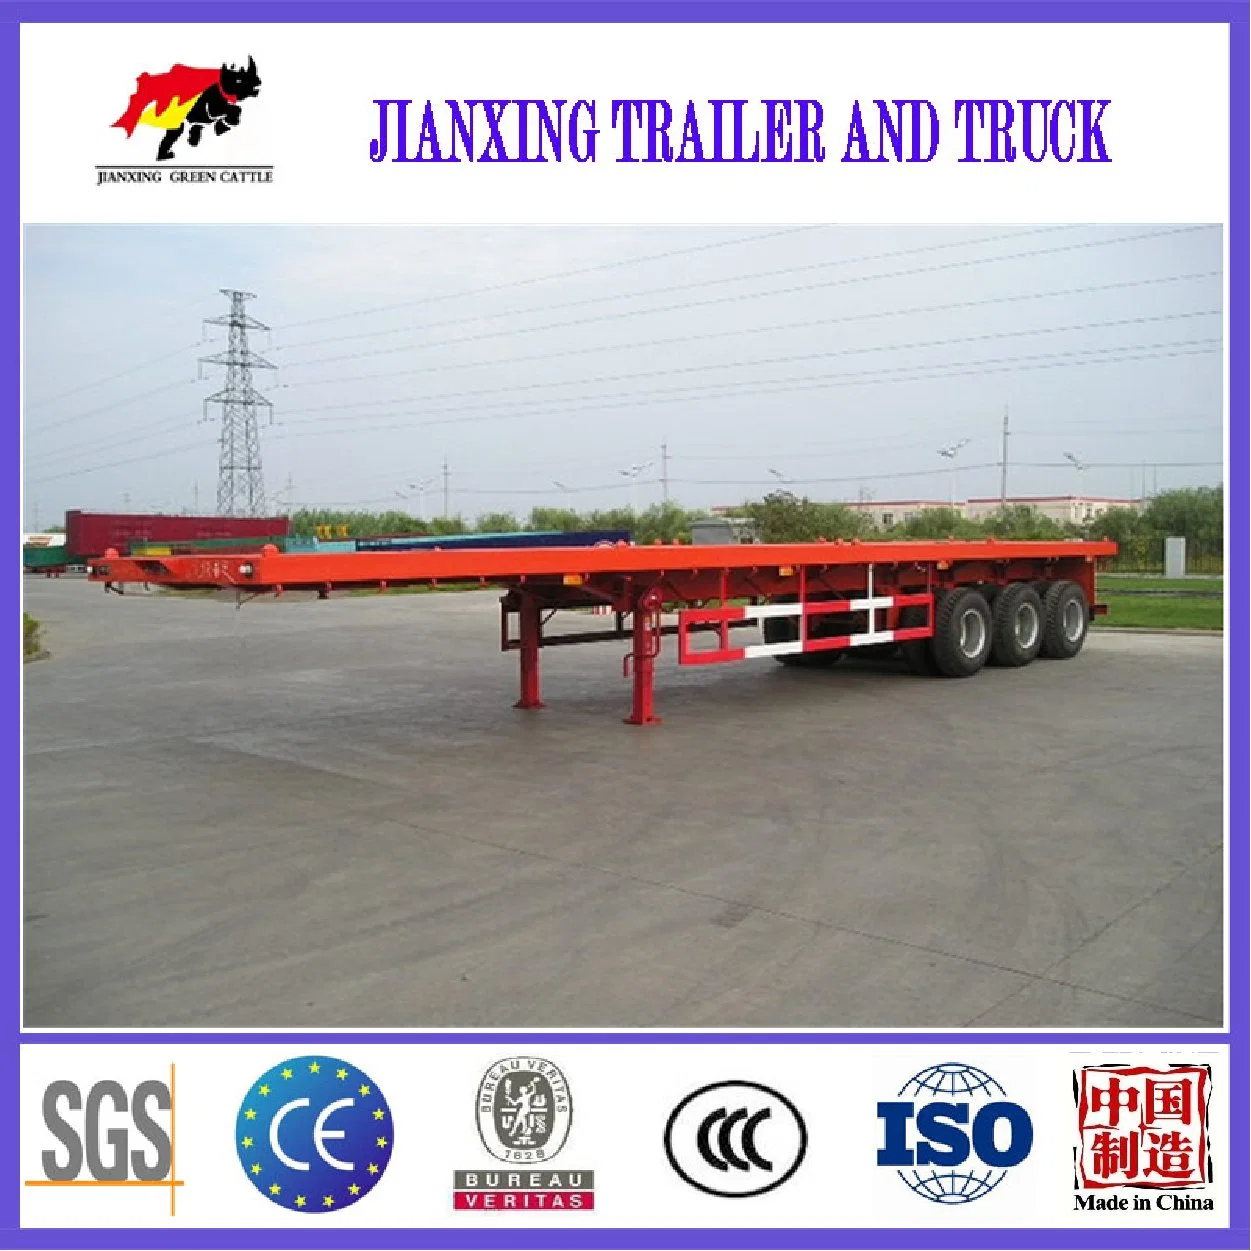 Jianxing Good Product Used Shipping Container 20FT 40FT Flatbed Semi Trailer 3 Axle Flat Bed Truck Trailer with Container Lock for Sale